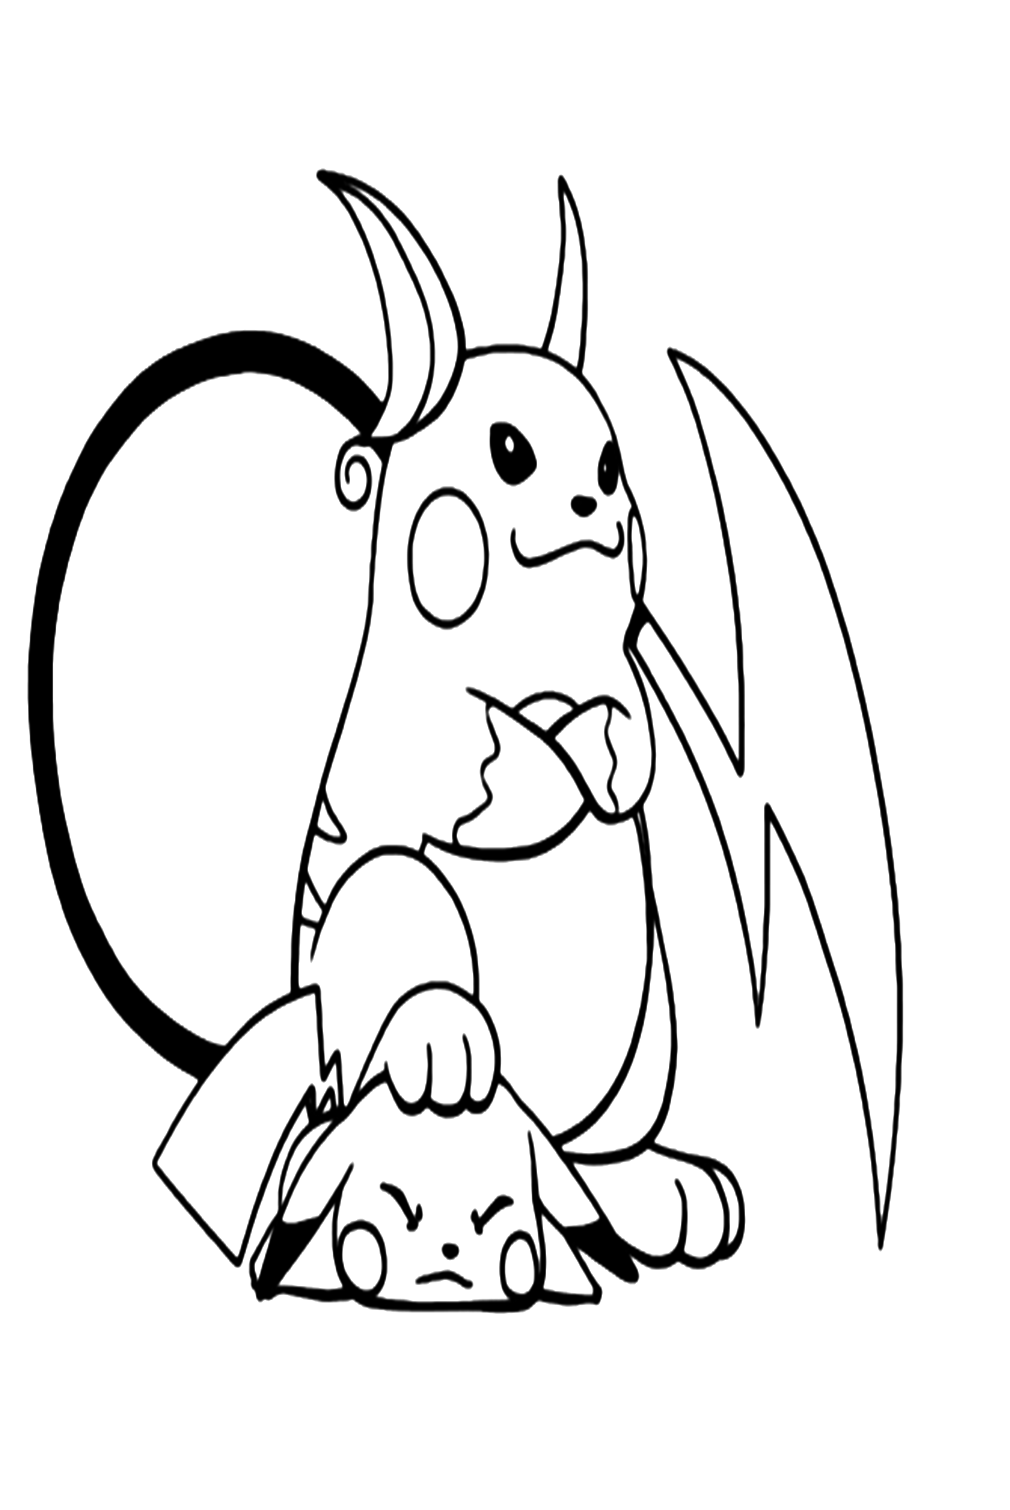 Raichu and Pikachu Coloring Pages